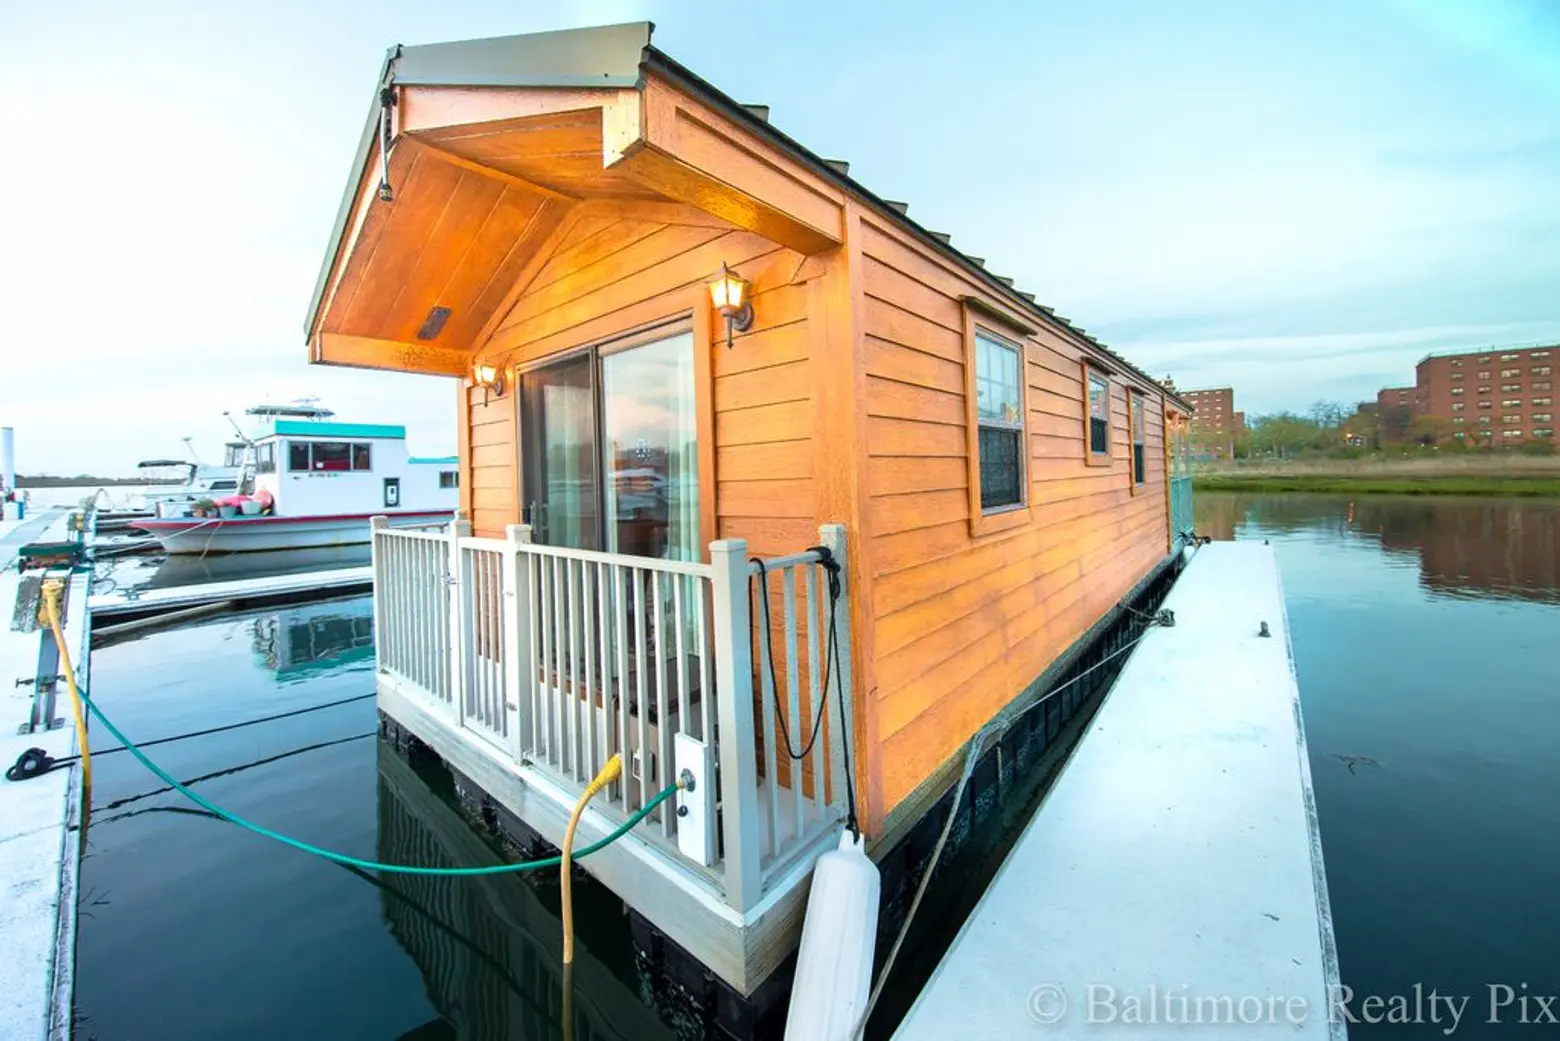 Queens houseboat asks $59,000 for 400 square feet of watery serenity